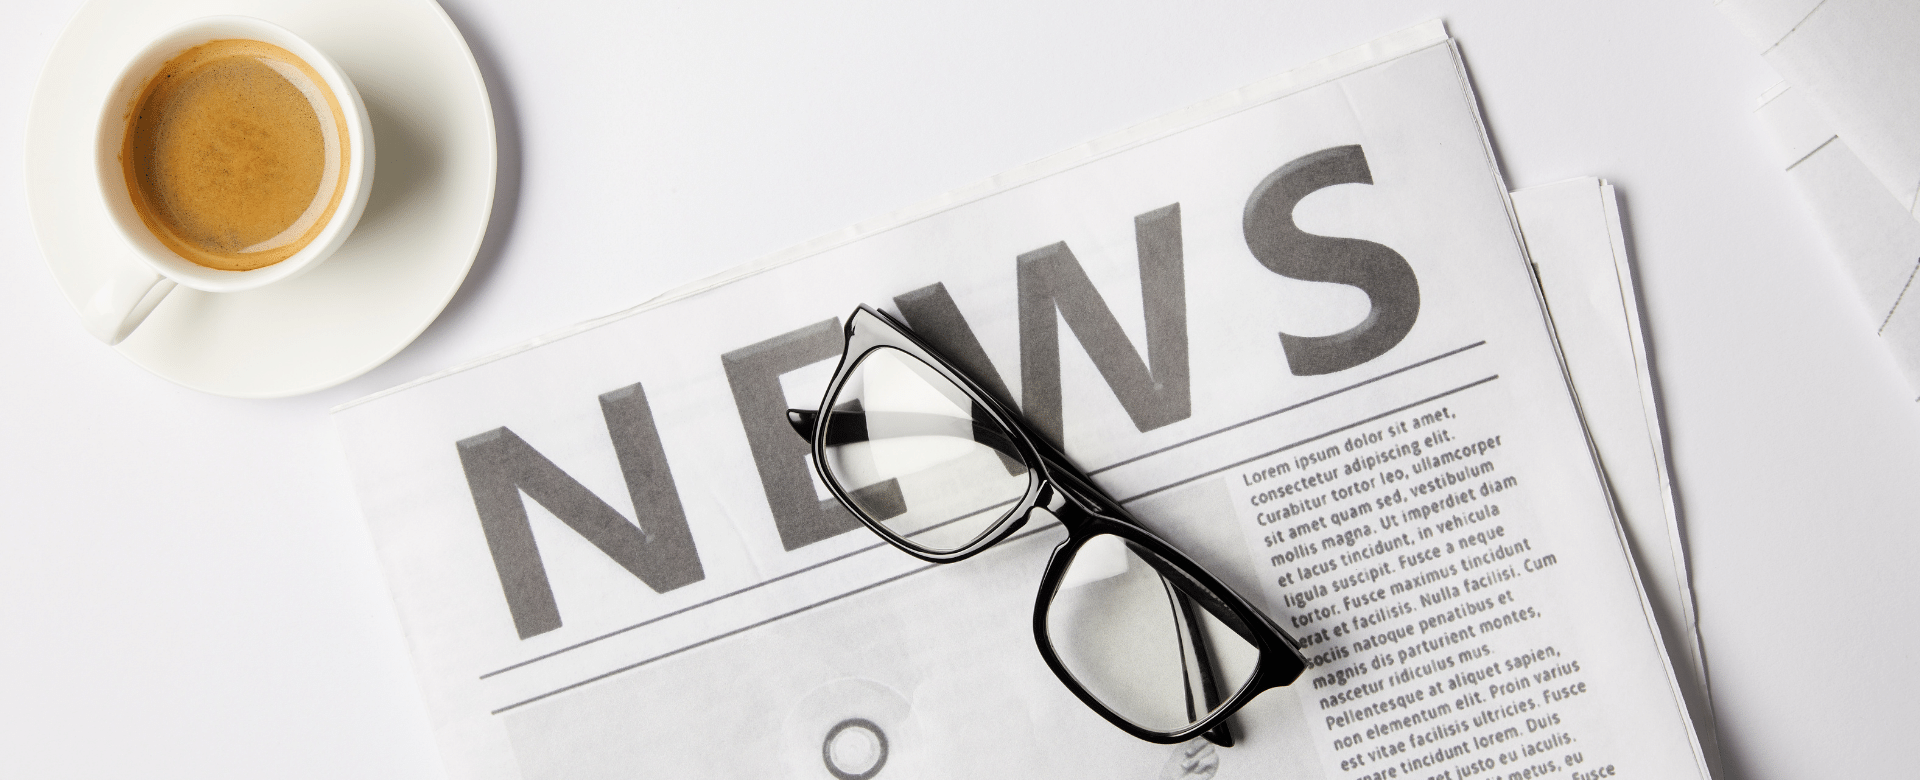 News written on newspaper with black rimmed glasses on top and next to a cup of coffee cup filled with coffee